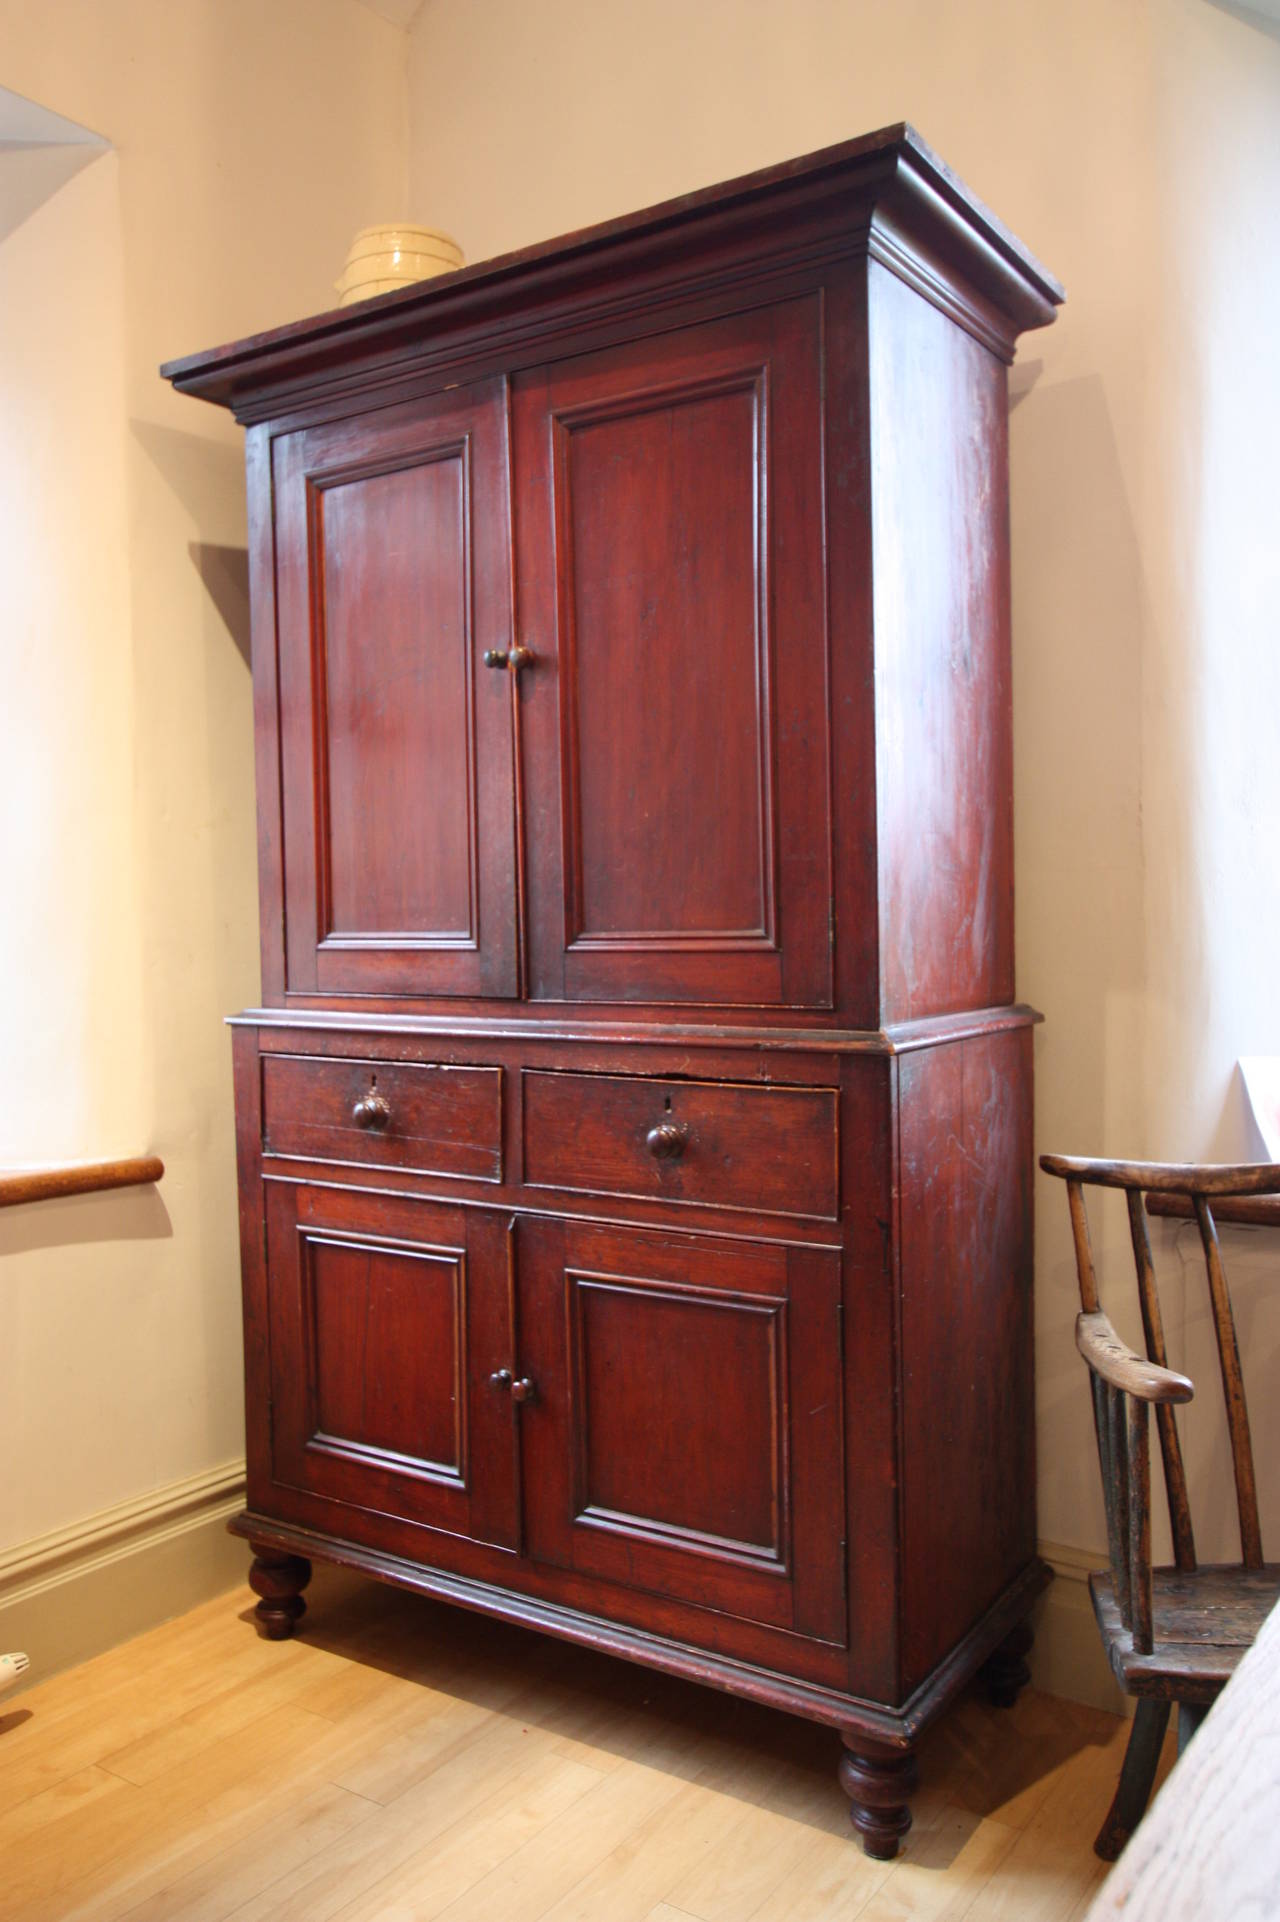 19th Century Antique Pine Food Cupboard.
This Welsh antique four door food cupboard slits at the waist and is in the original finish.
With a large out turned cornice to the top, then two cupboards doors over two more cupboards, this antique food